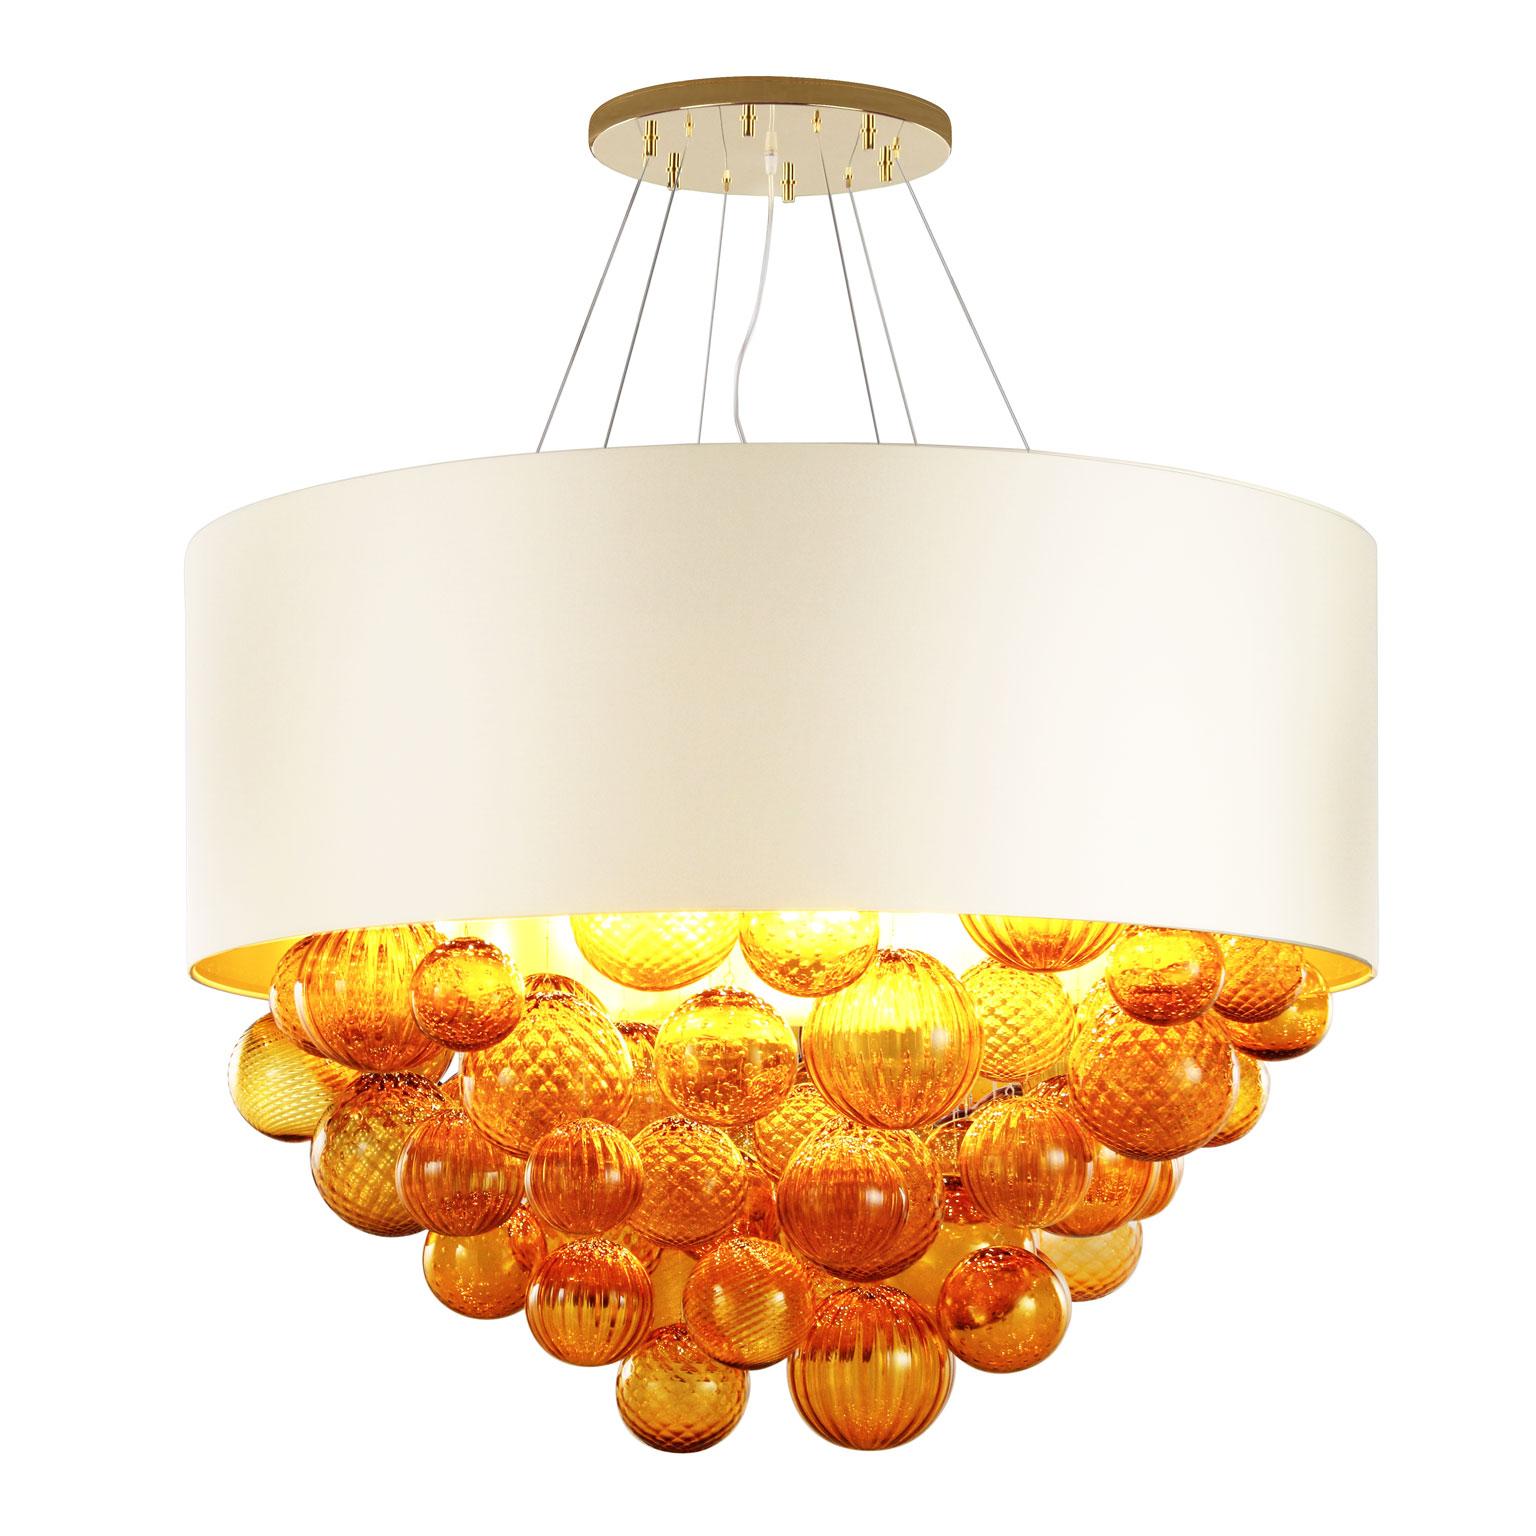 Other Large Artistic Suspension Lamp Amber Murano Glass, ivory Lampshade by Multiforme For Sale